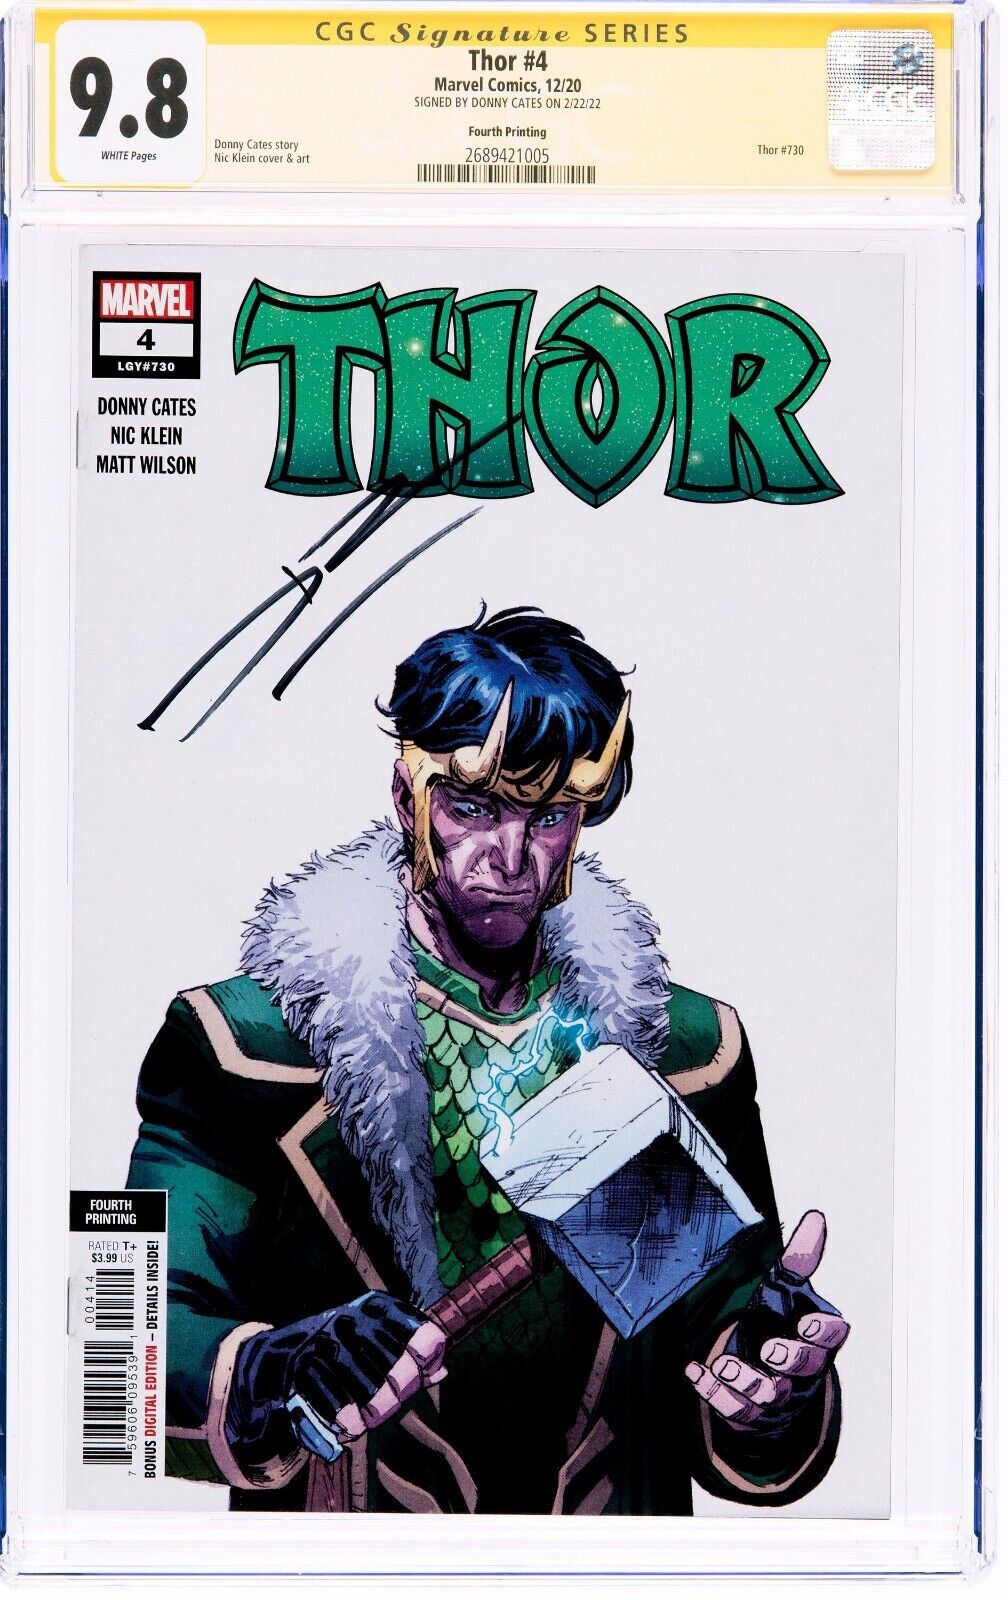 THOR #4 CGC 9.8 S.S. (Marvel 2020) Signed by DONNY CATES, LOKI cover 4th Print